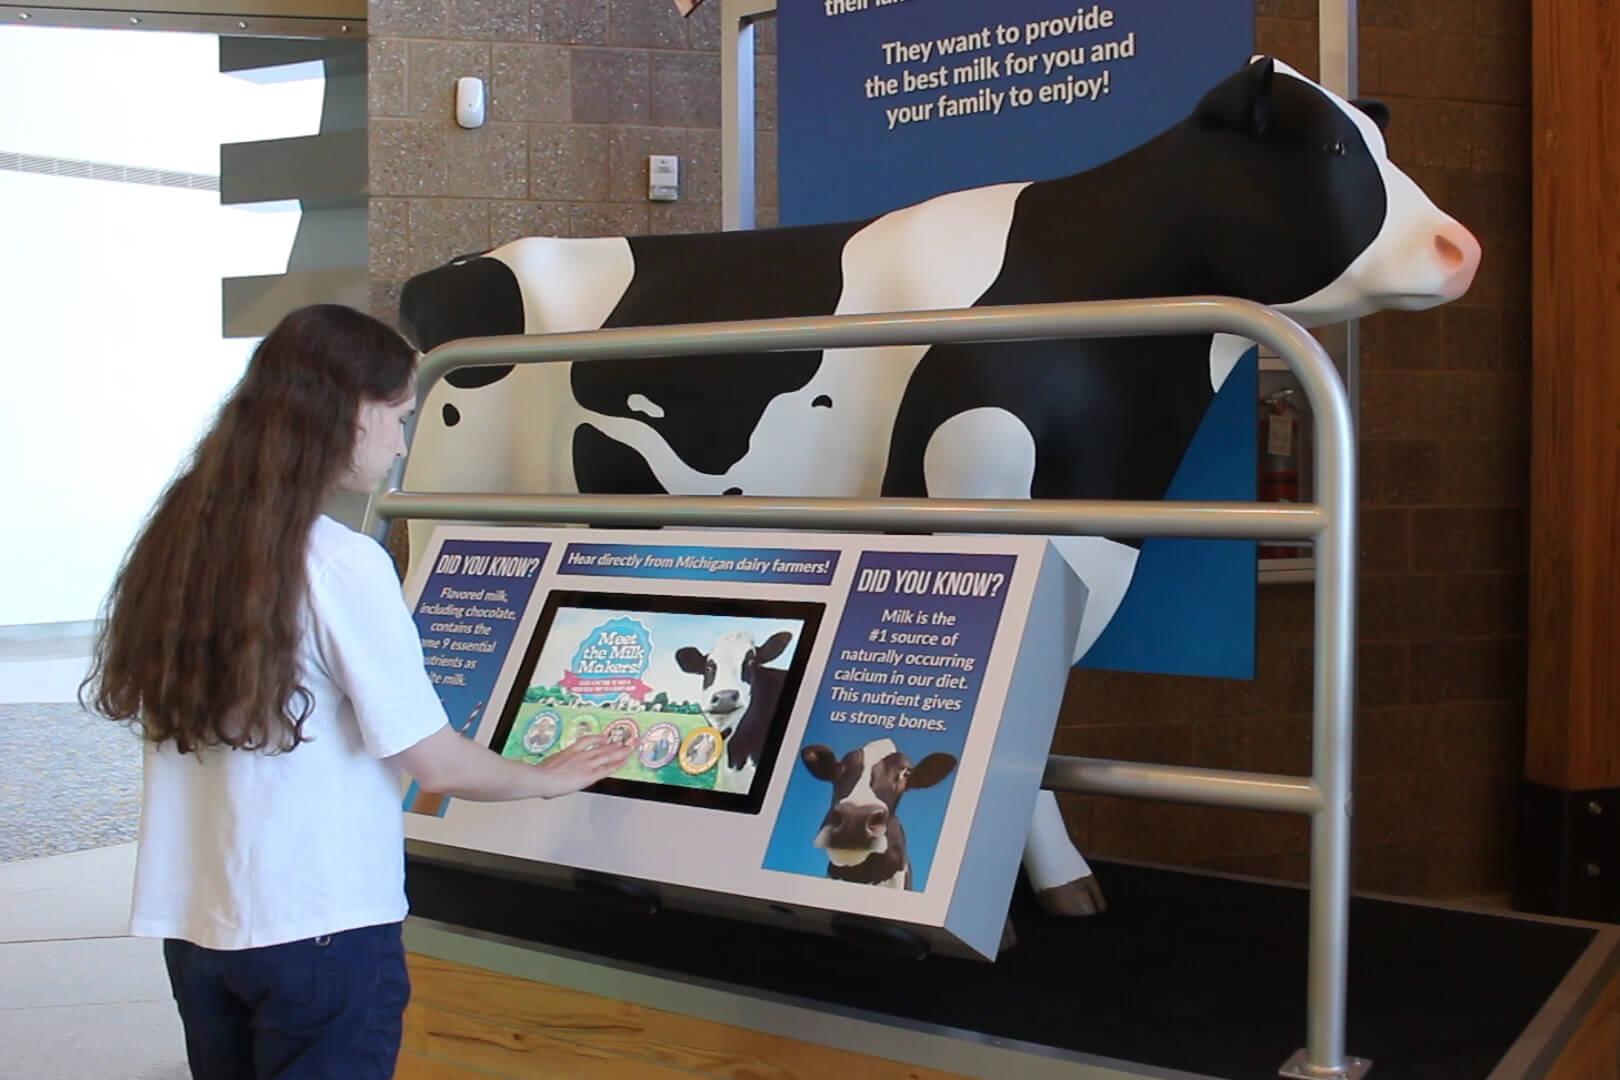 Woman standing near milking cow exhibit and interacting with video screen.